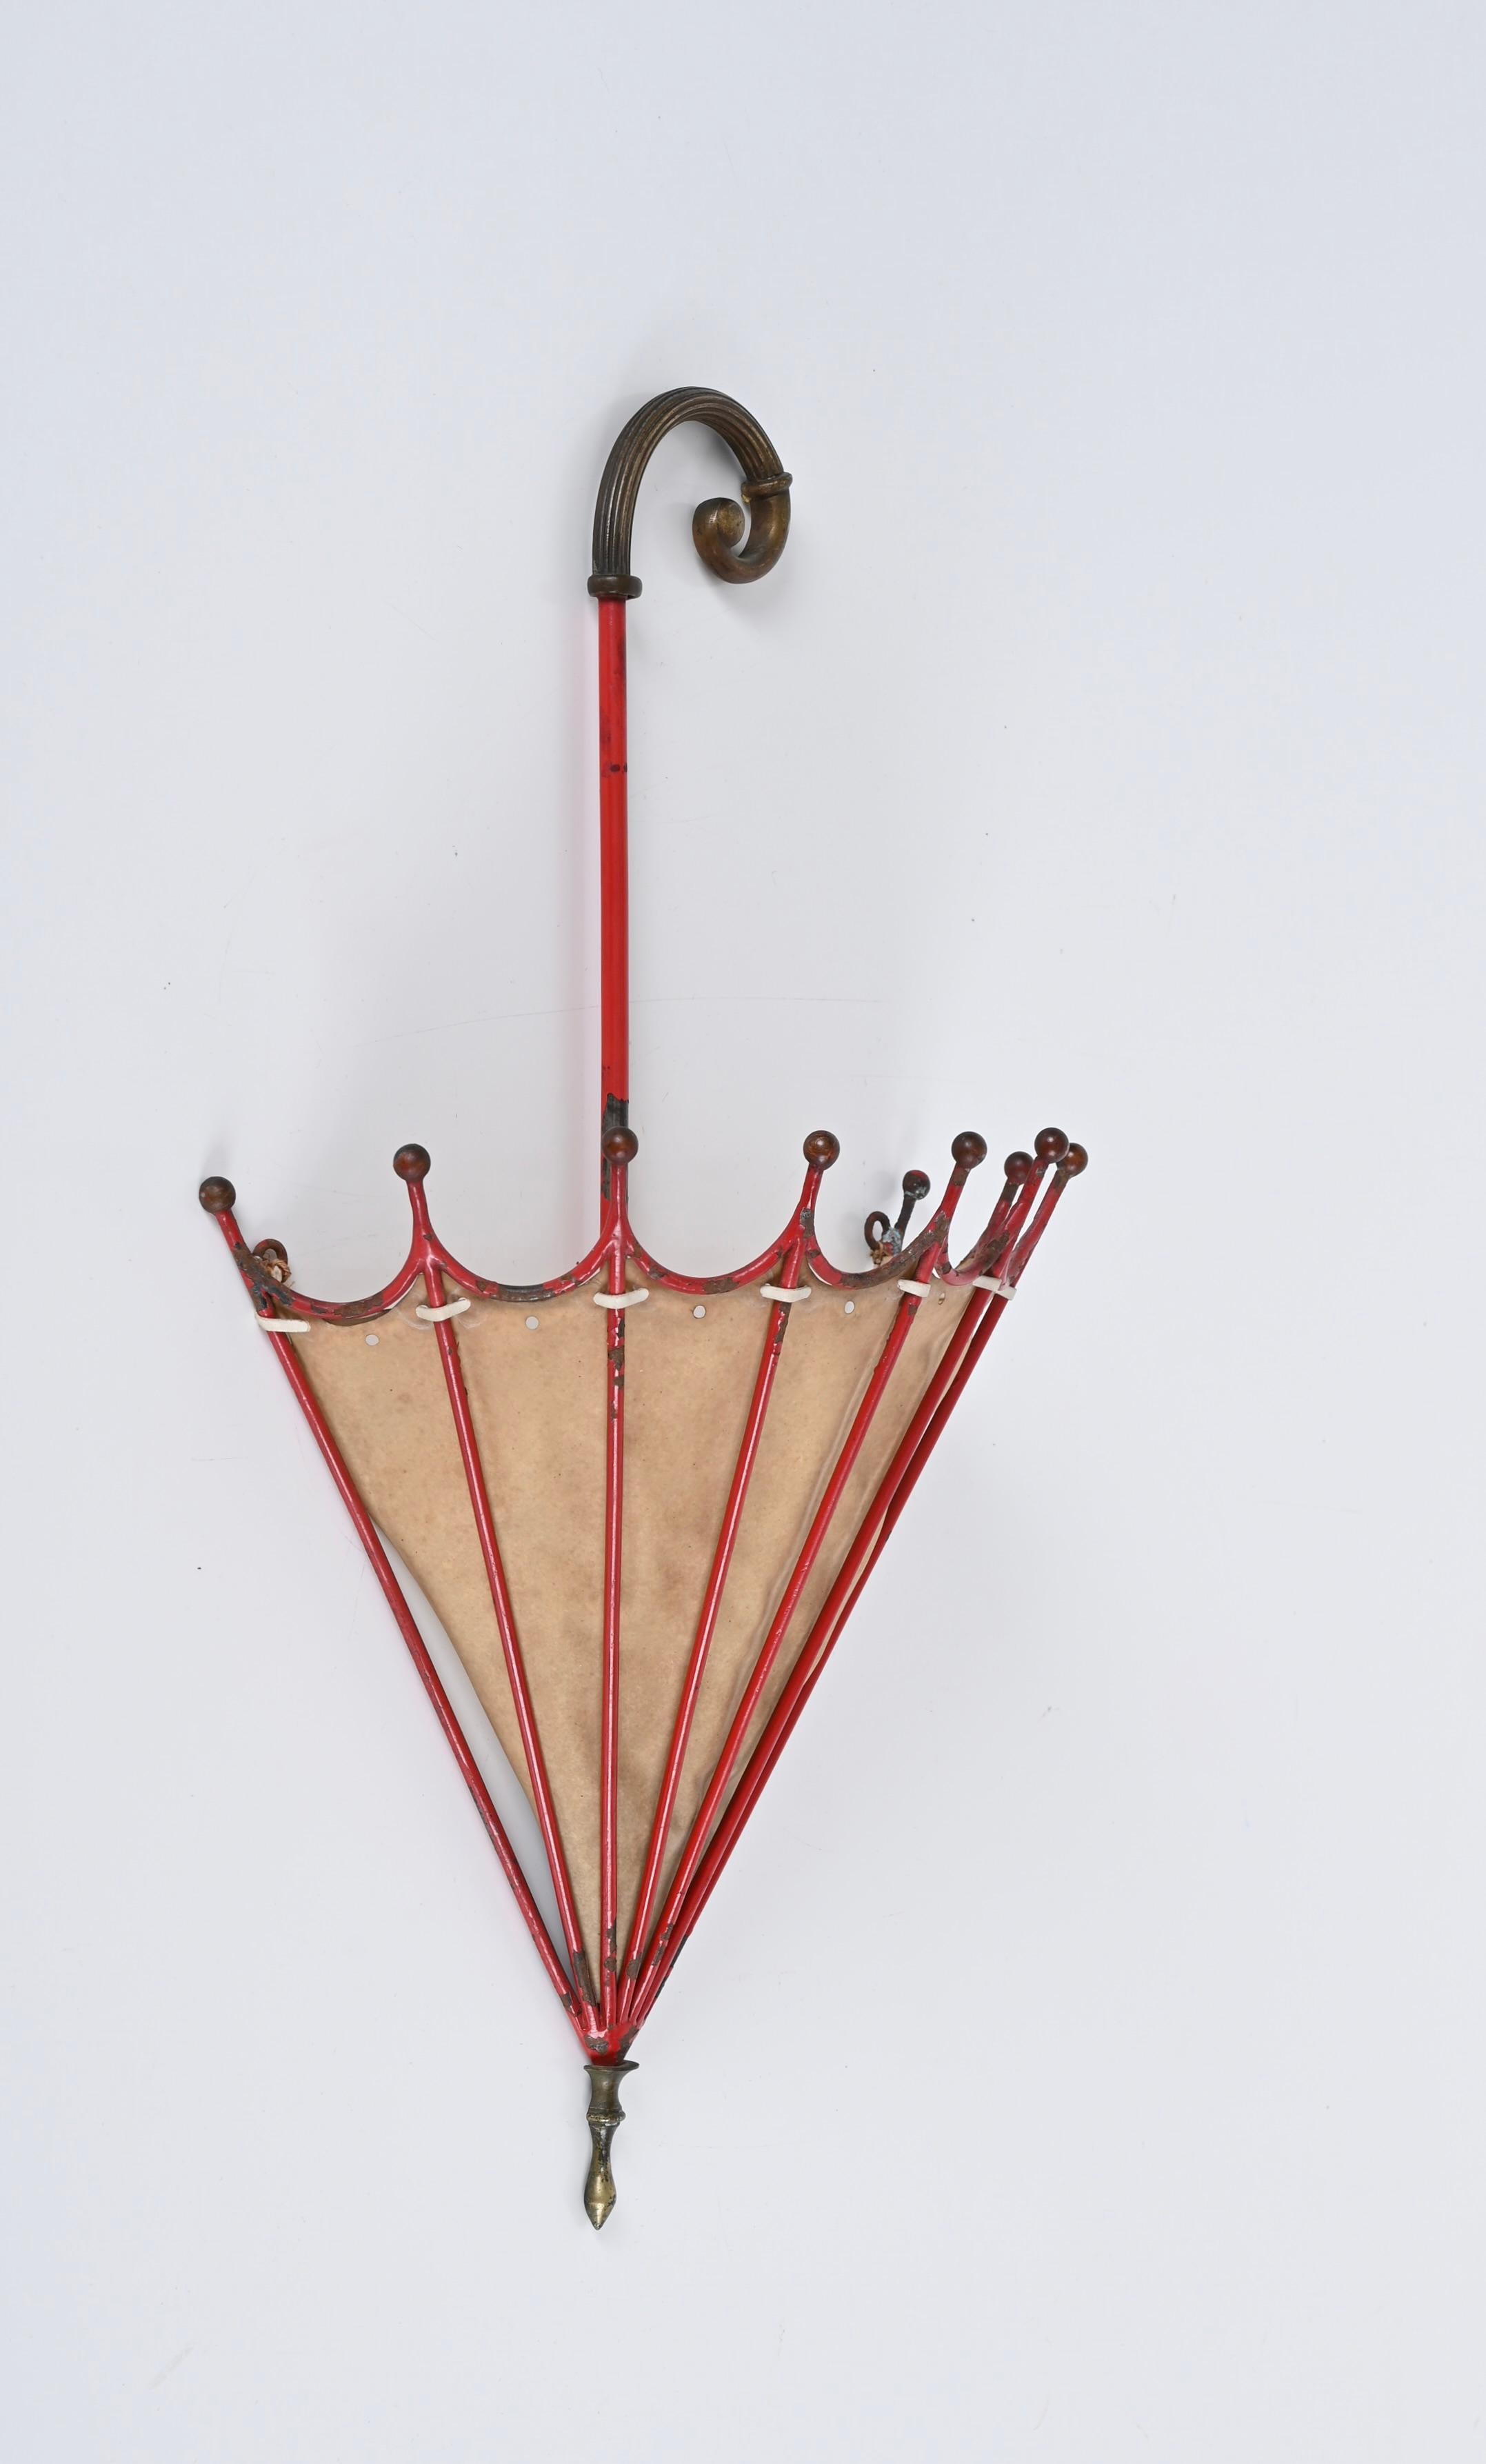 Italian Liberty Umbrella-Shaped Sconce in Iron, Brass and Parchment, Italy 1920s